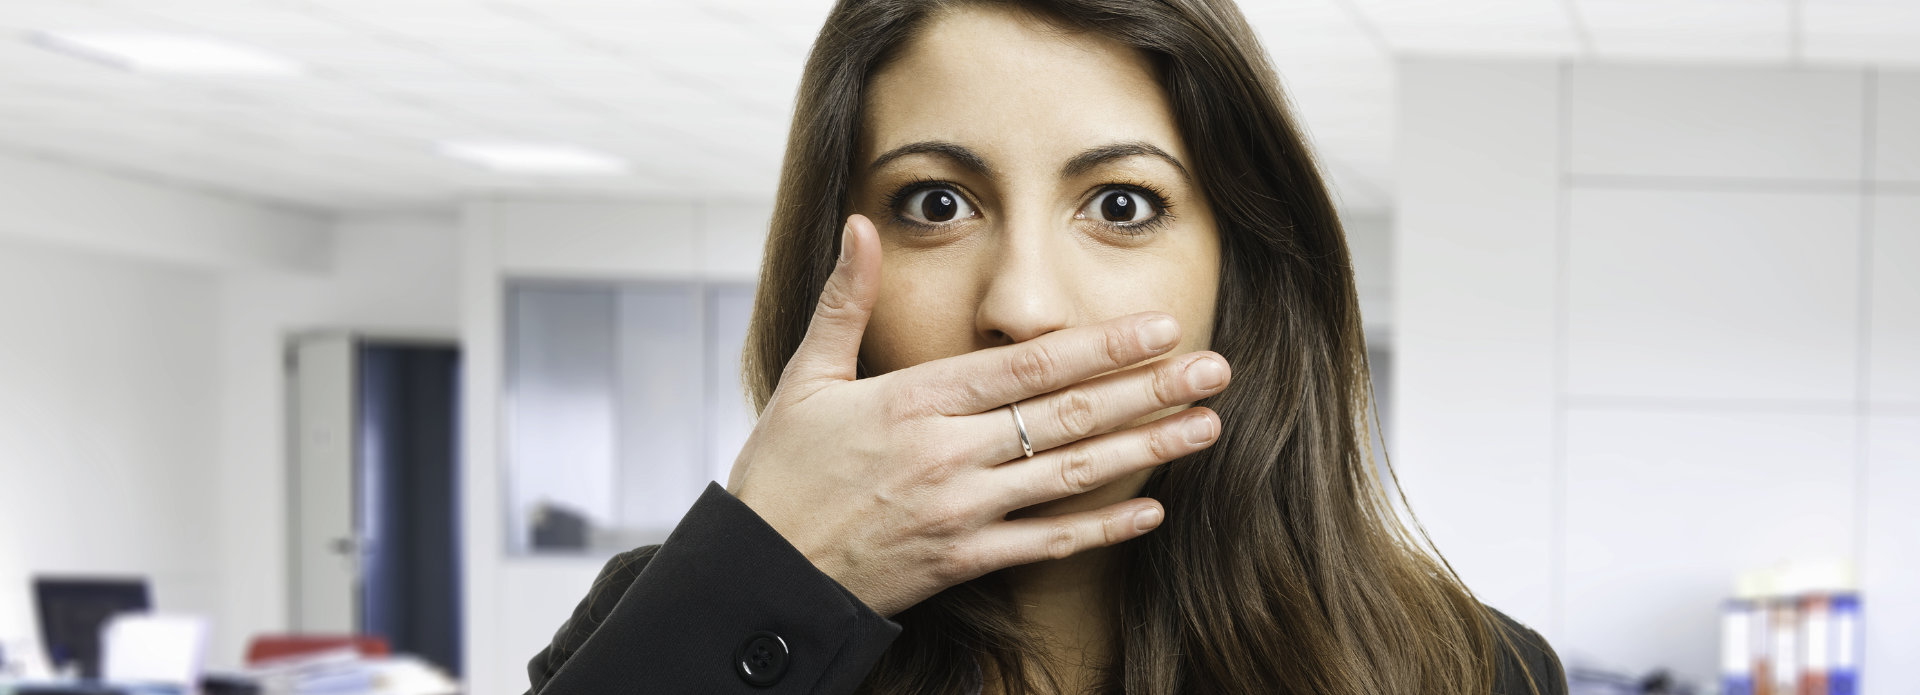 young woman covering her mouth with a hand due to halitosis